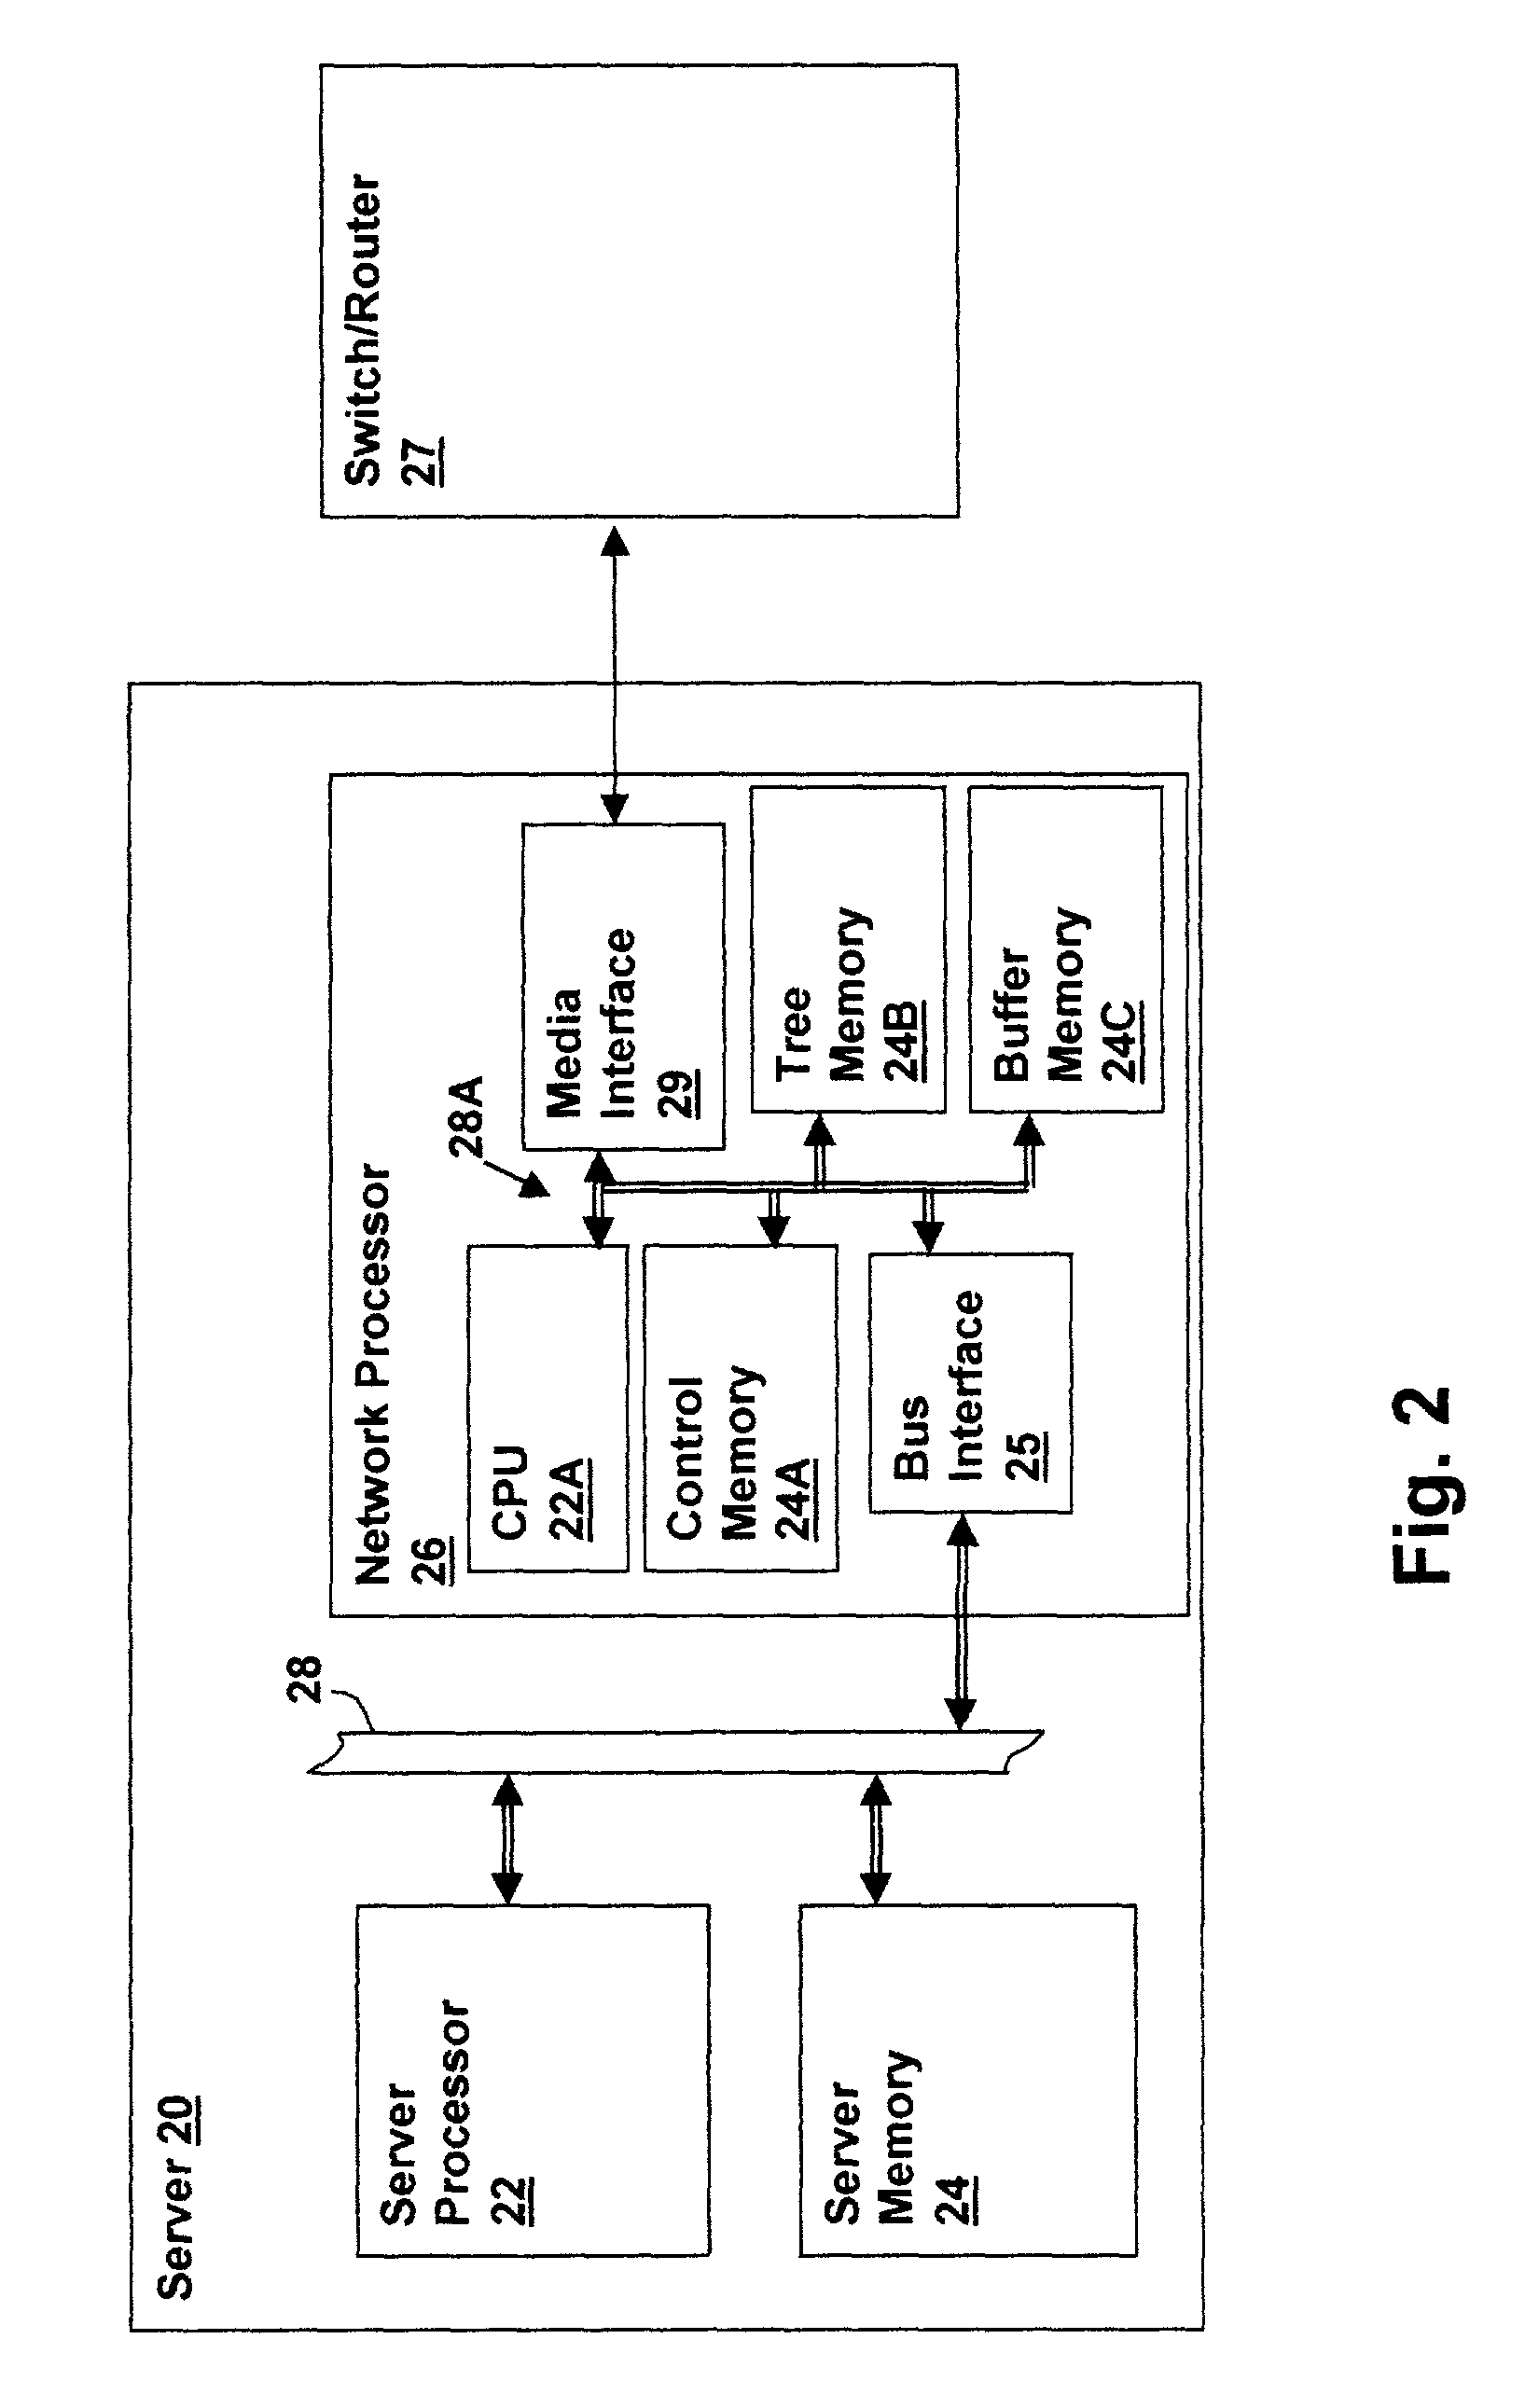 Method for server-directed packet forwarding by a network controller based on a packet buffer threshold